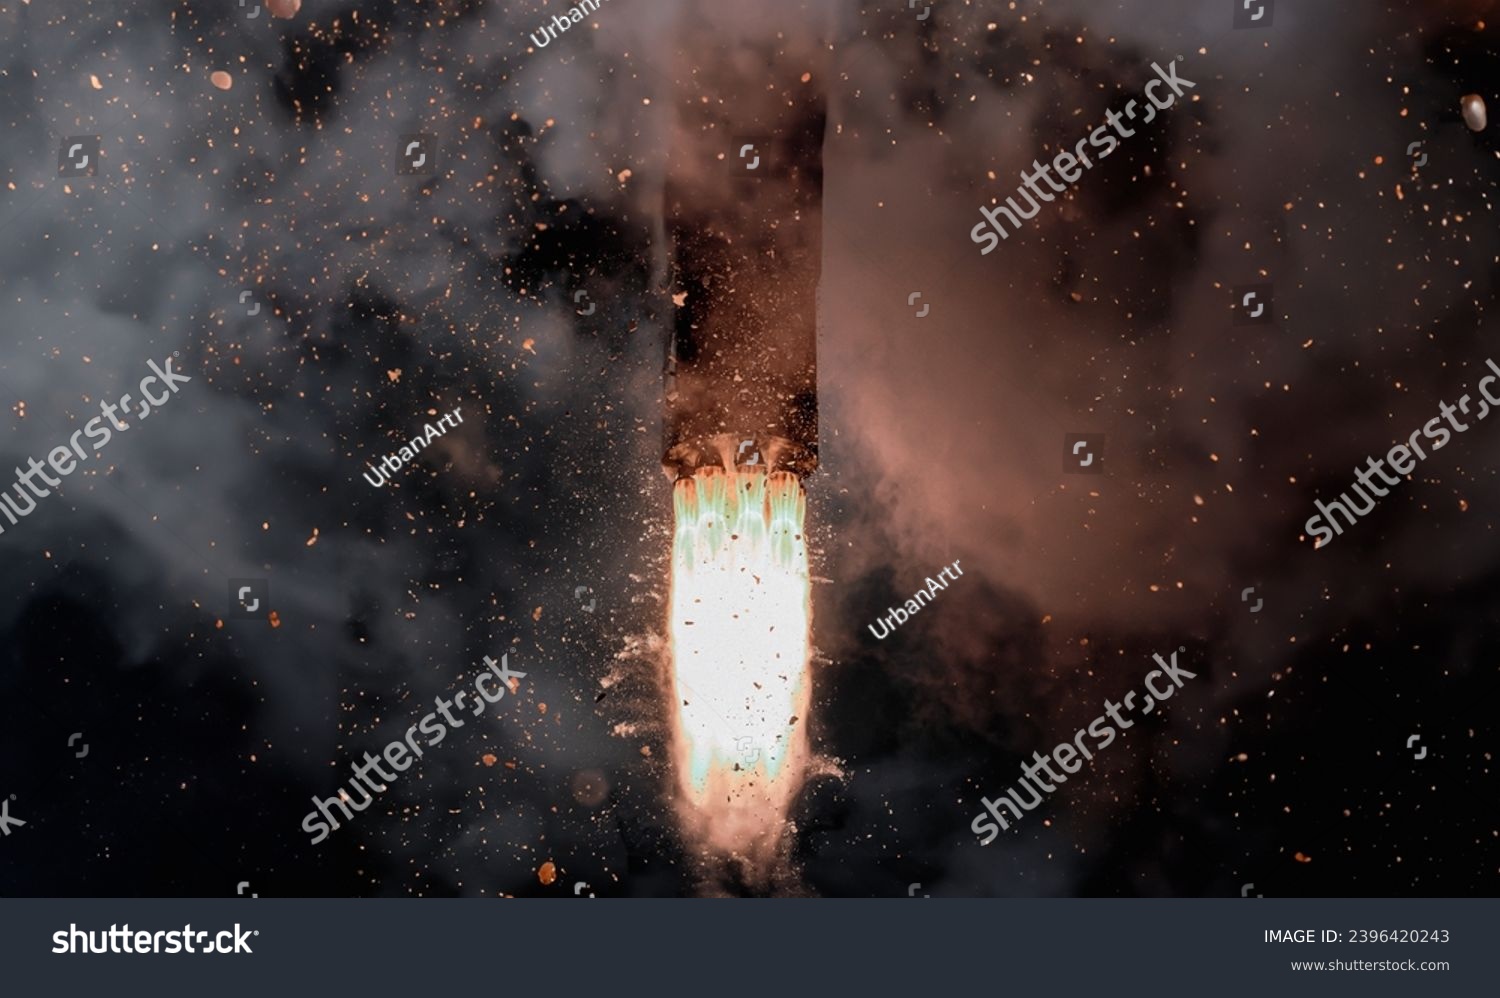 Rocket Launch at Night Powerful Takeoff with Fiery Engine and Sparking Embers. Space shuttle rocket launch concept wallpaper. Elements of this image furnished by NASA #2396420243